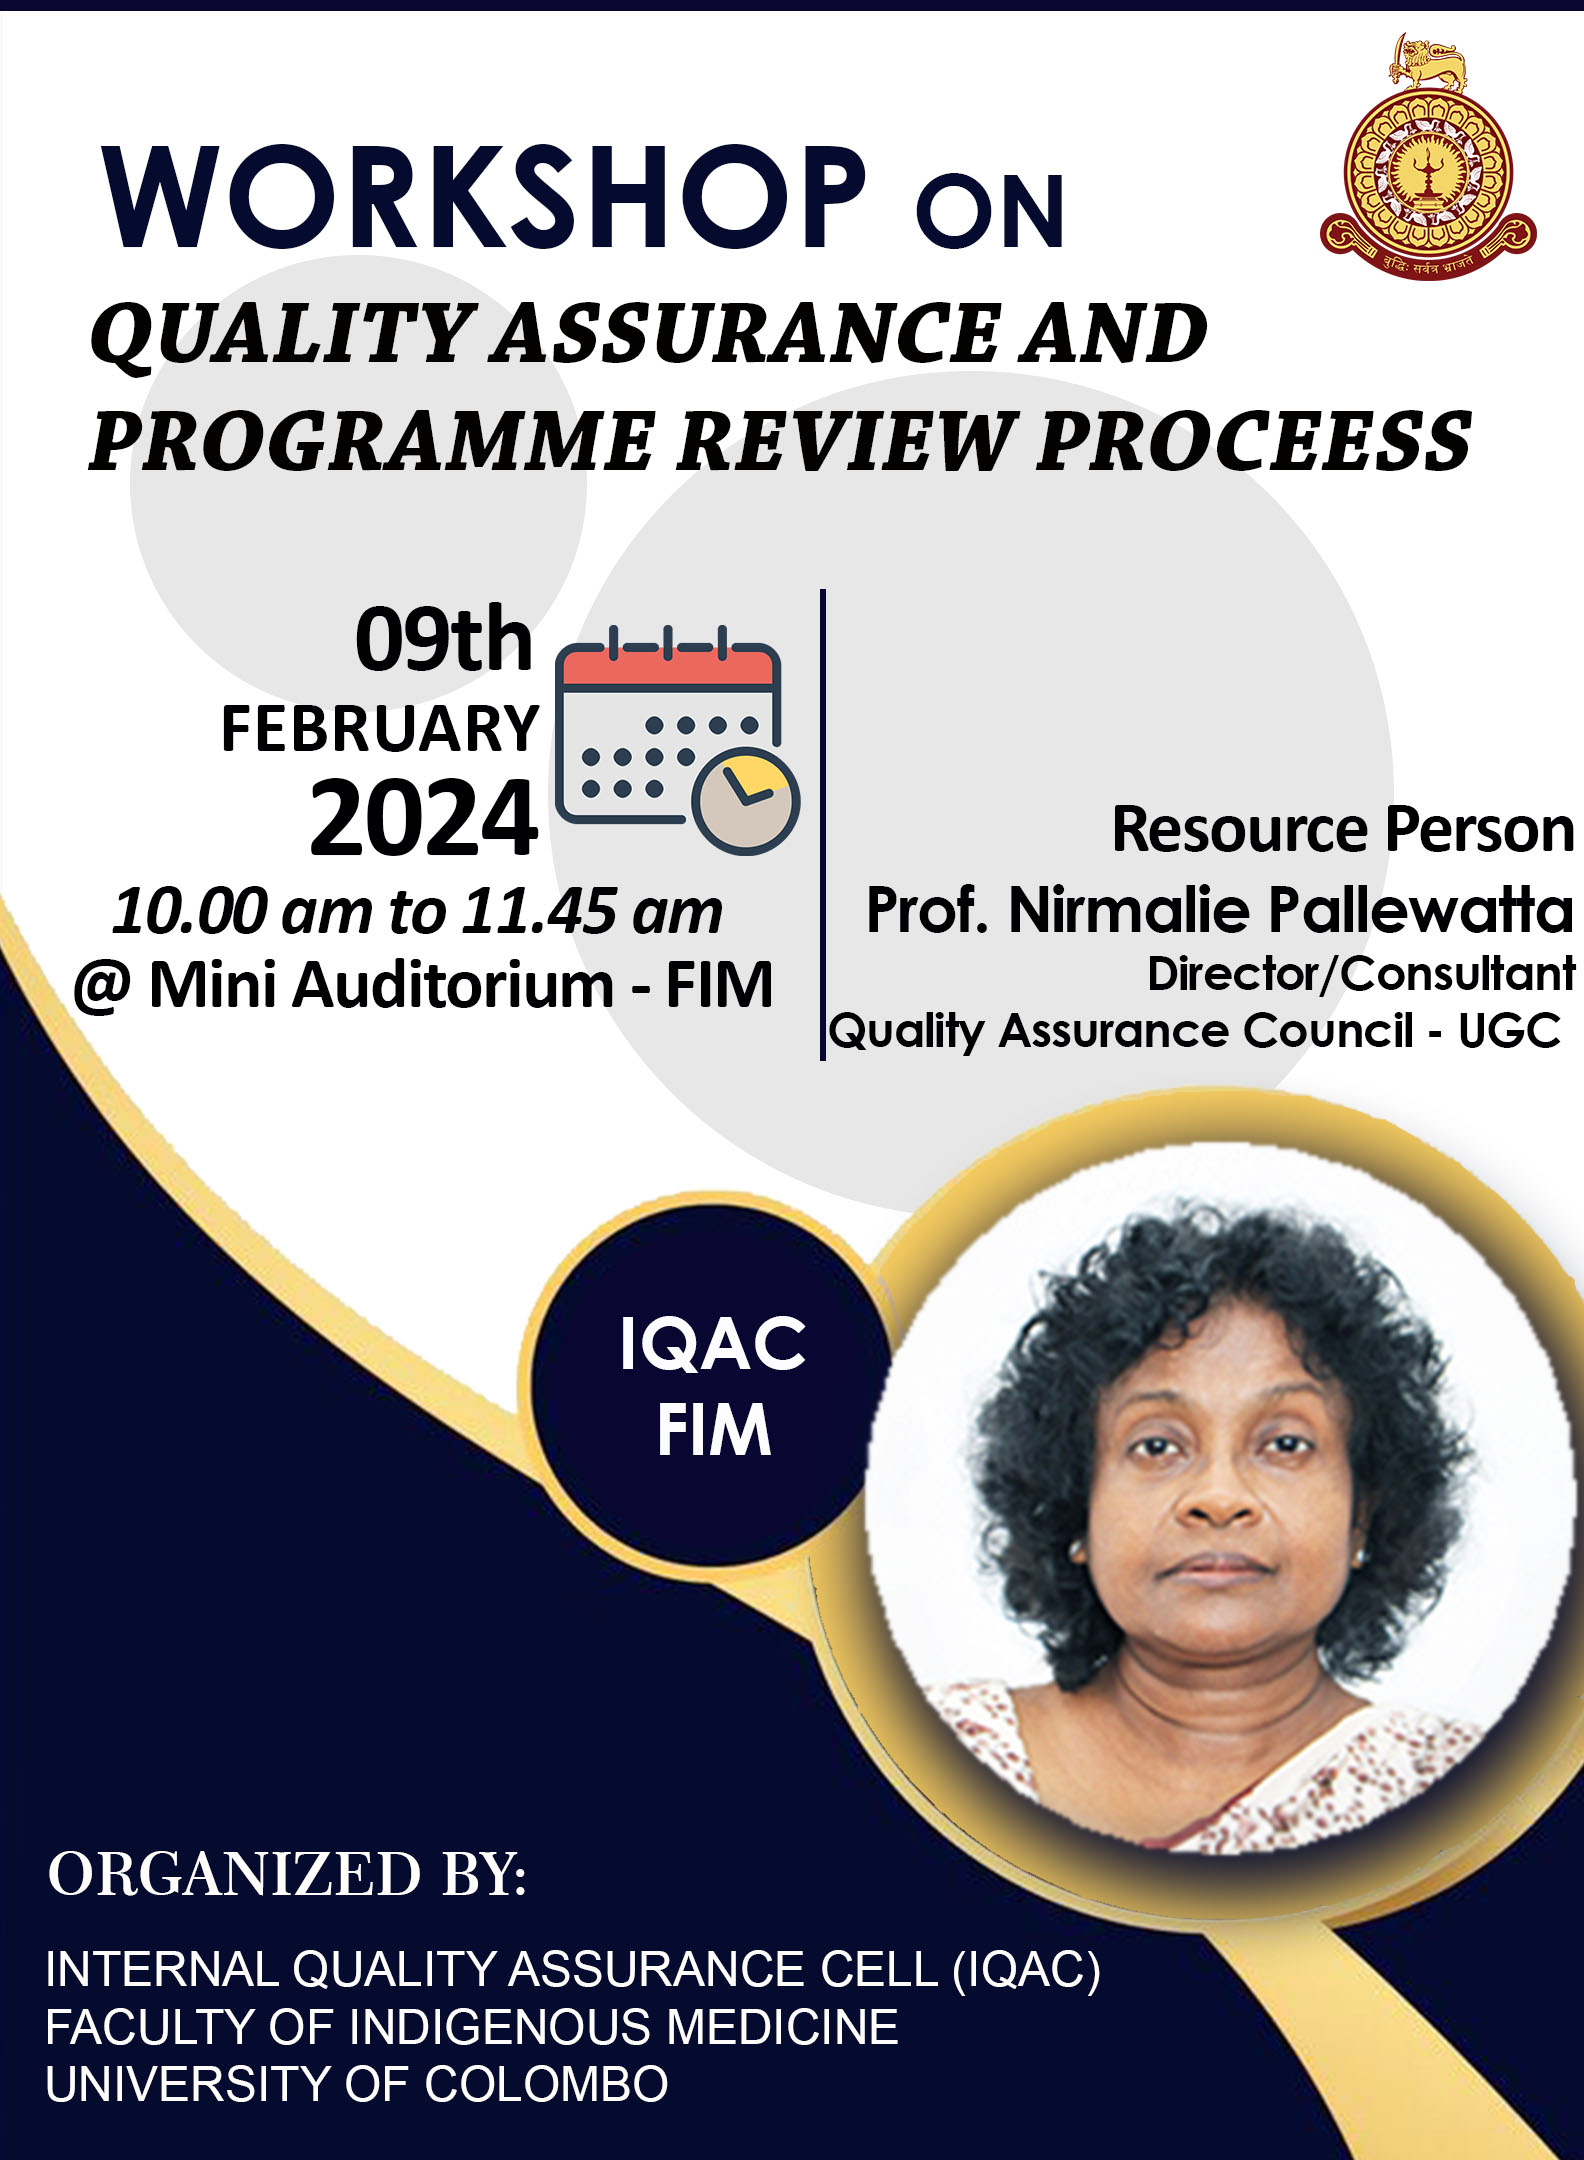 WORKSHOP ON QUALITY ASSURANCE AND PROGRAMME REVIEW PROCEESS